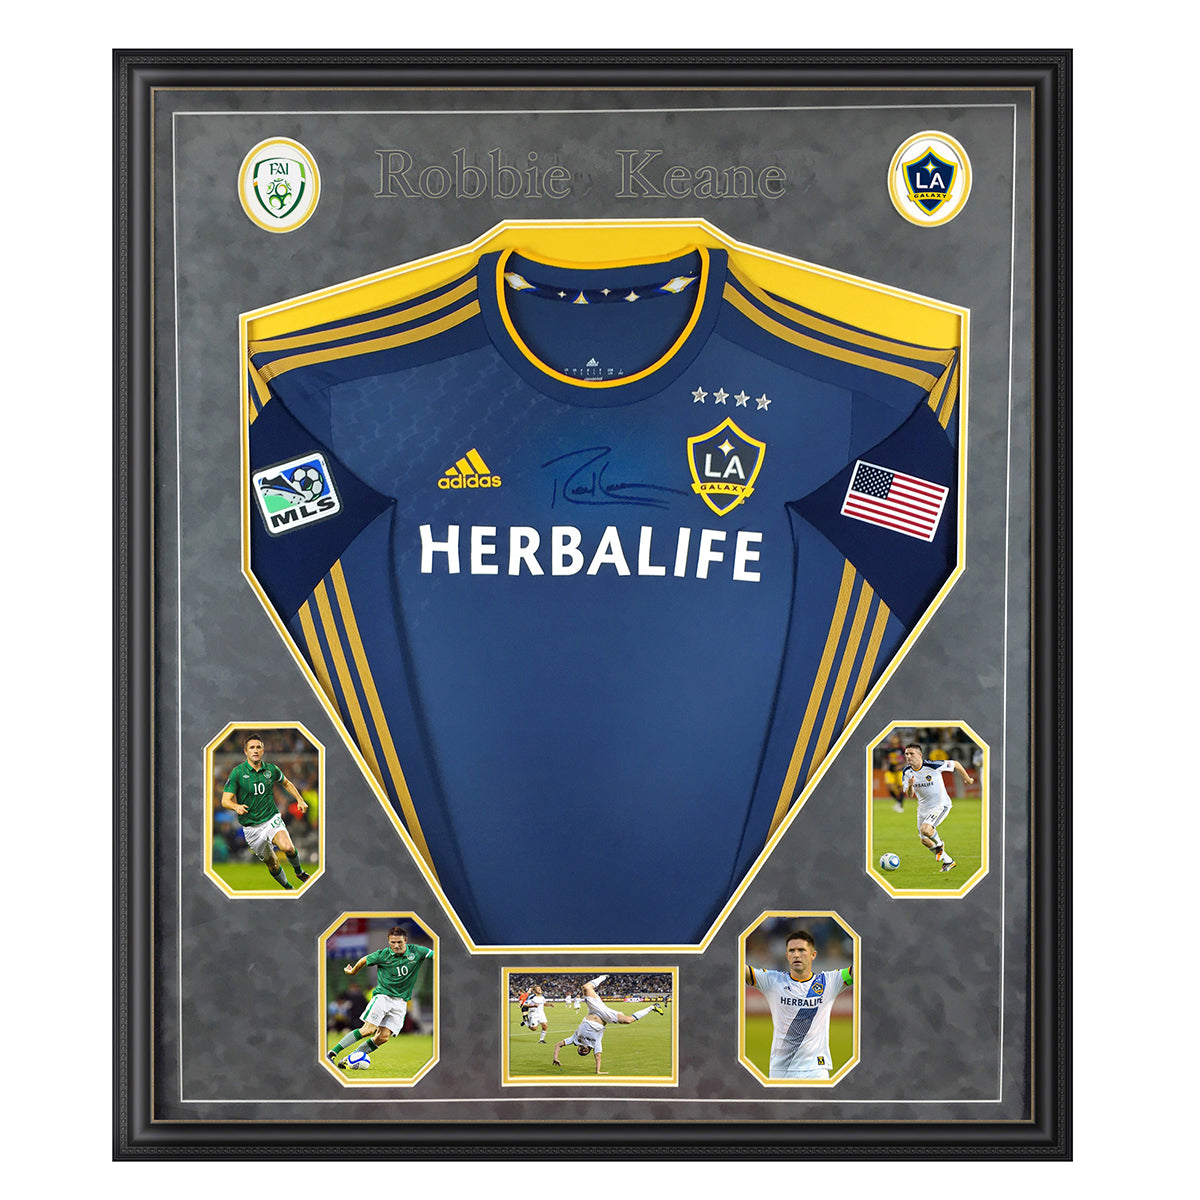 LA Galaxy jersey frame - with logos, etc in suedette grey 